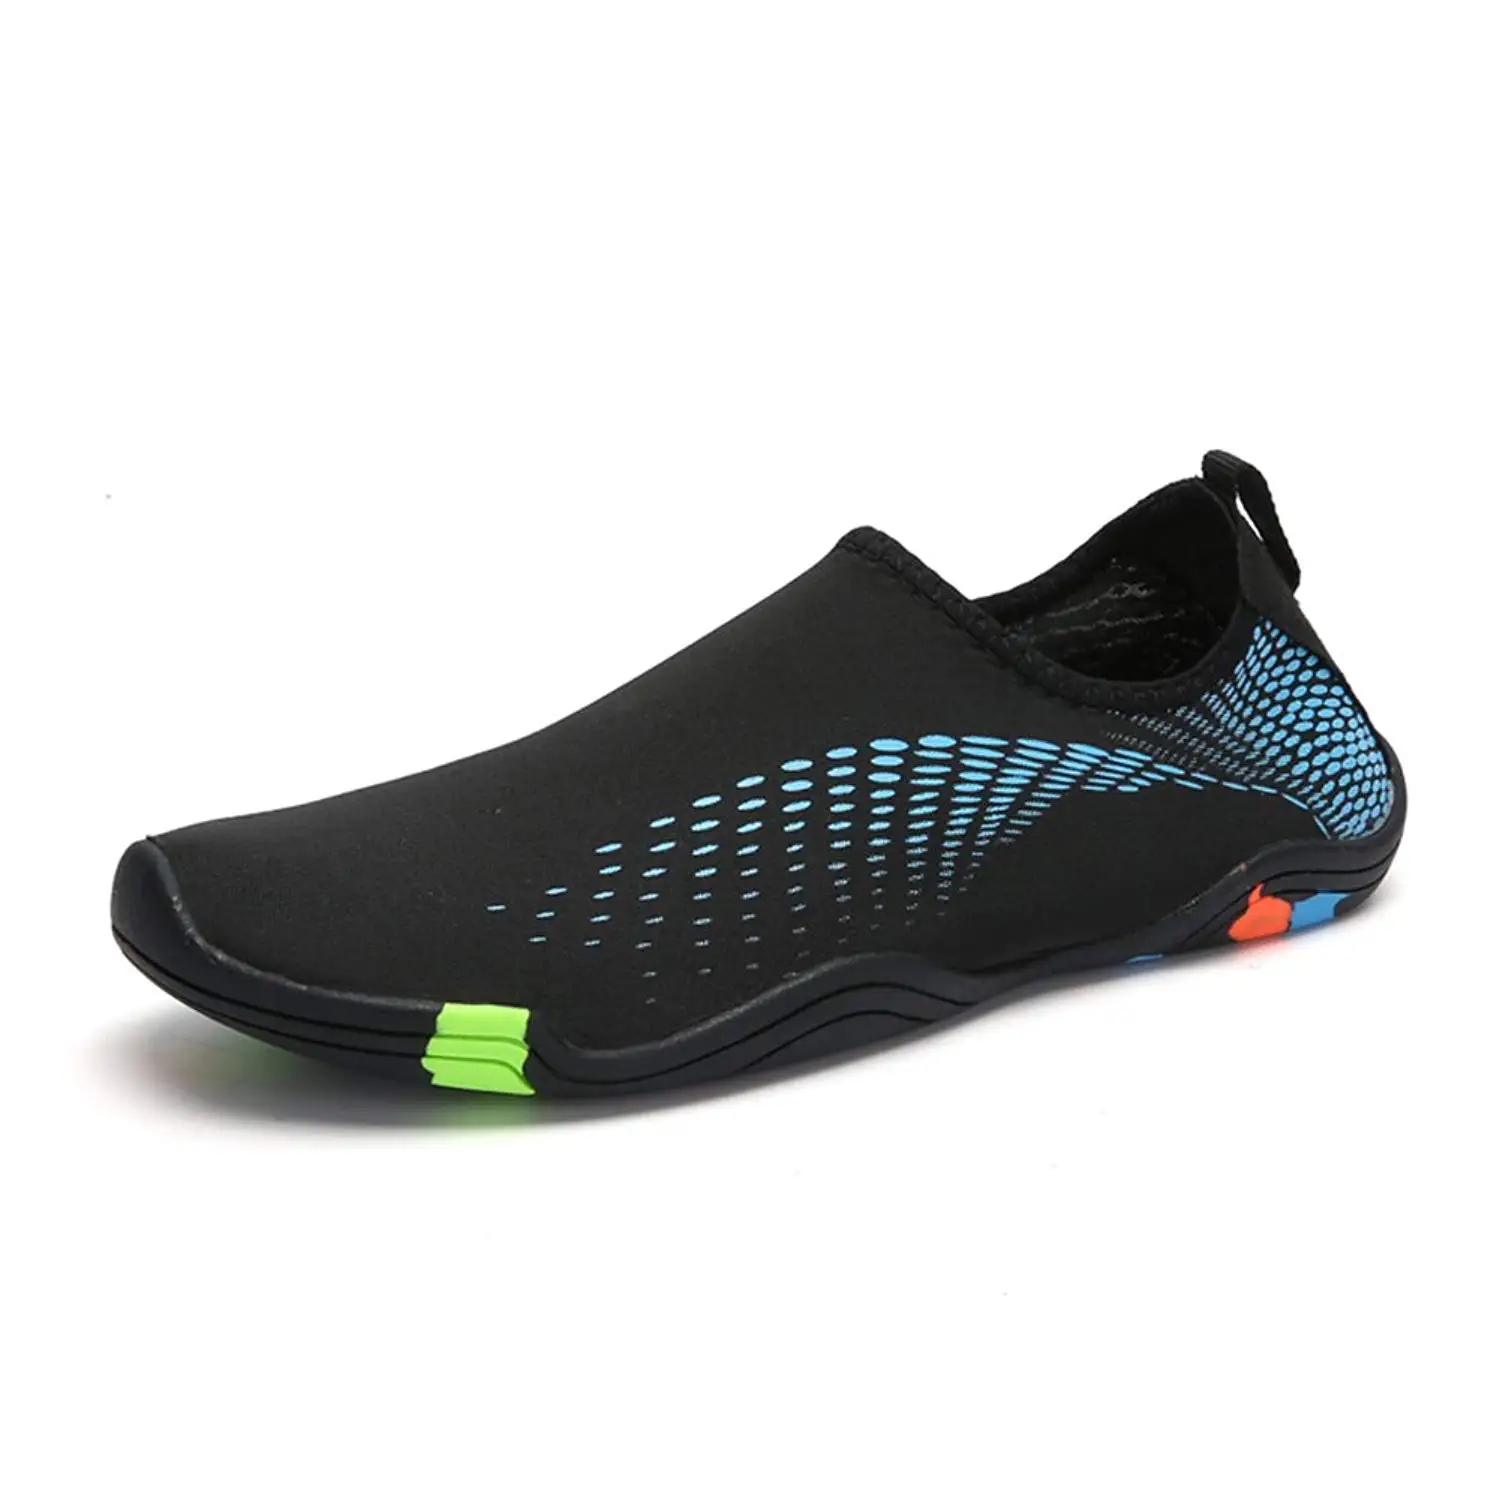 Cheap Surf Shoes, find Surf Shoes deals on line at Alibaba.com